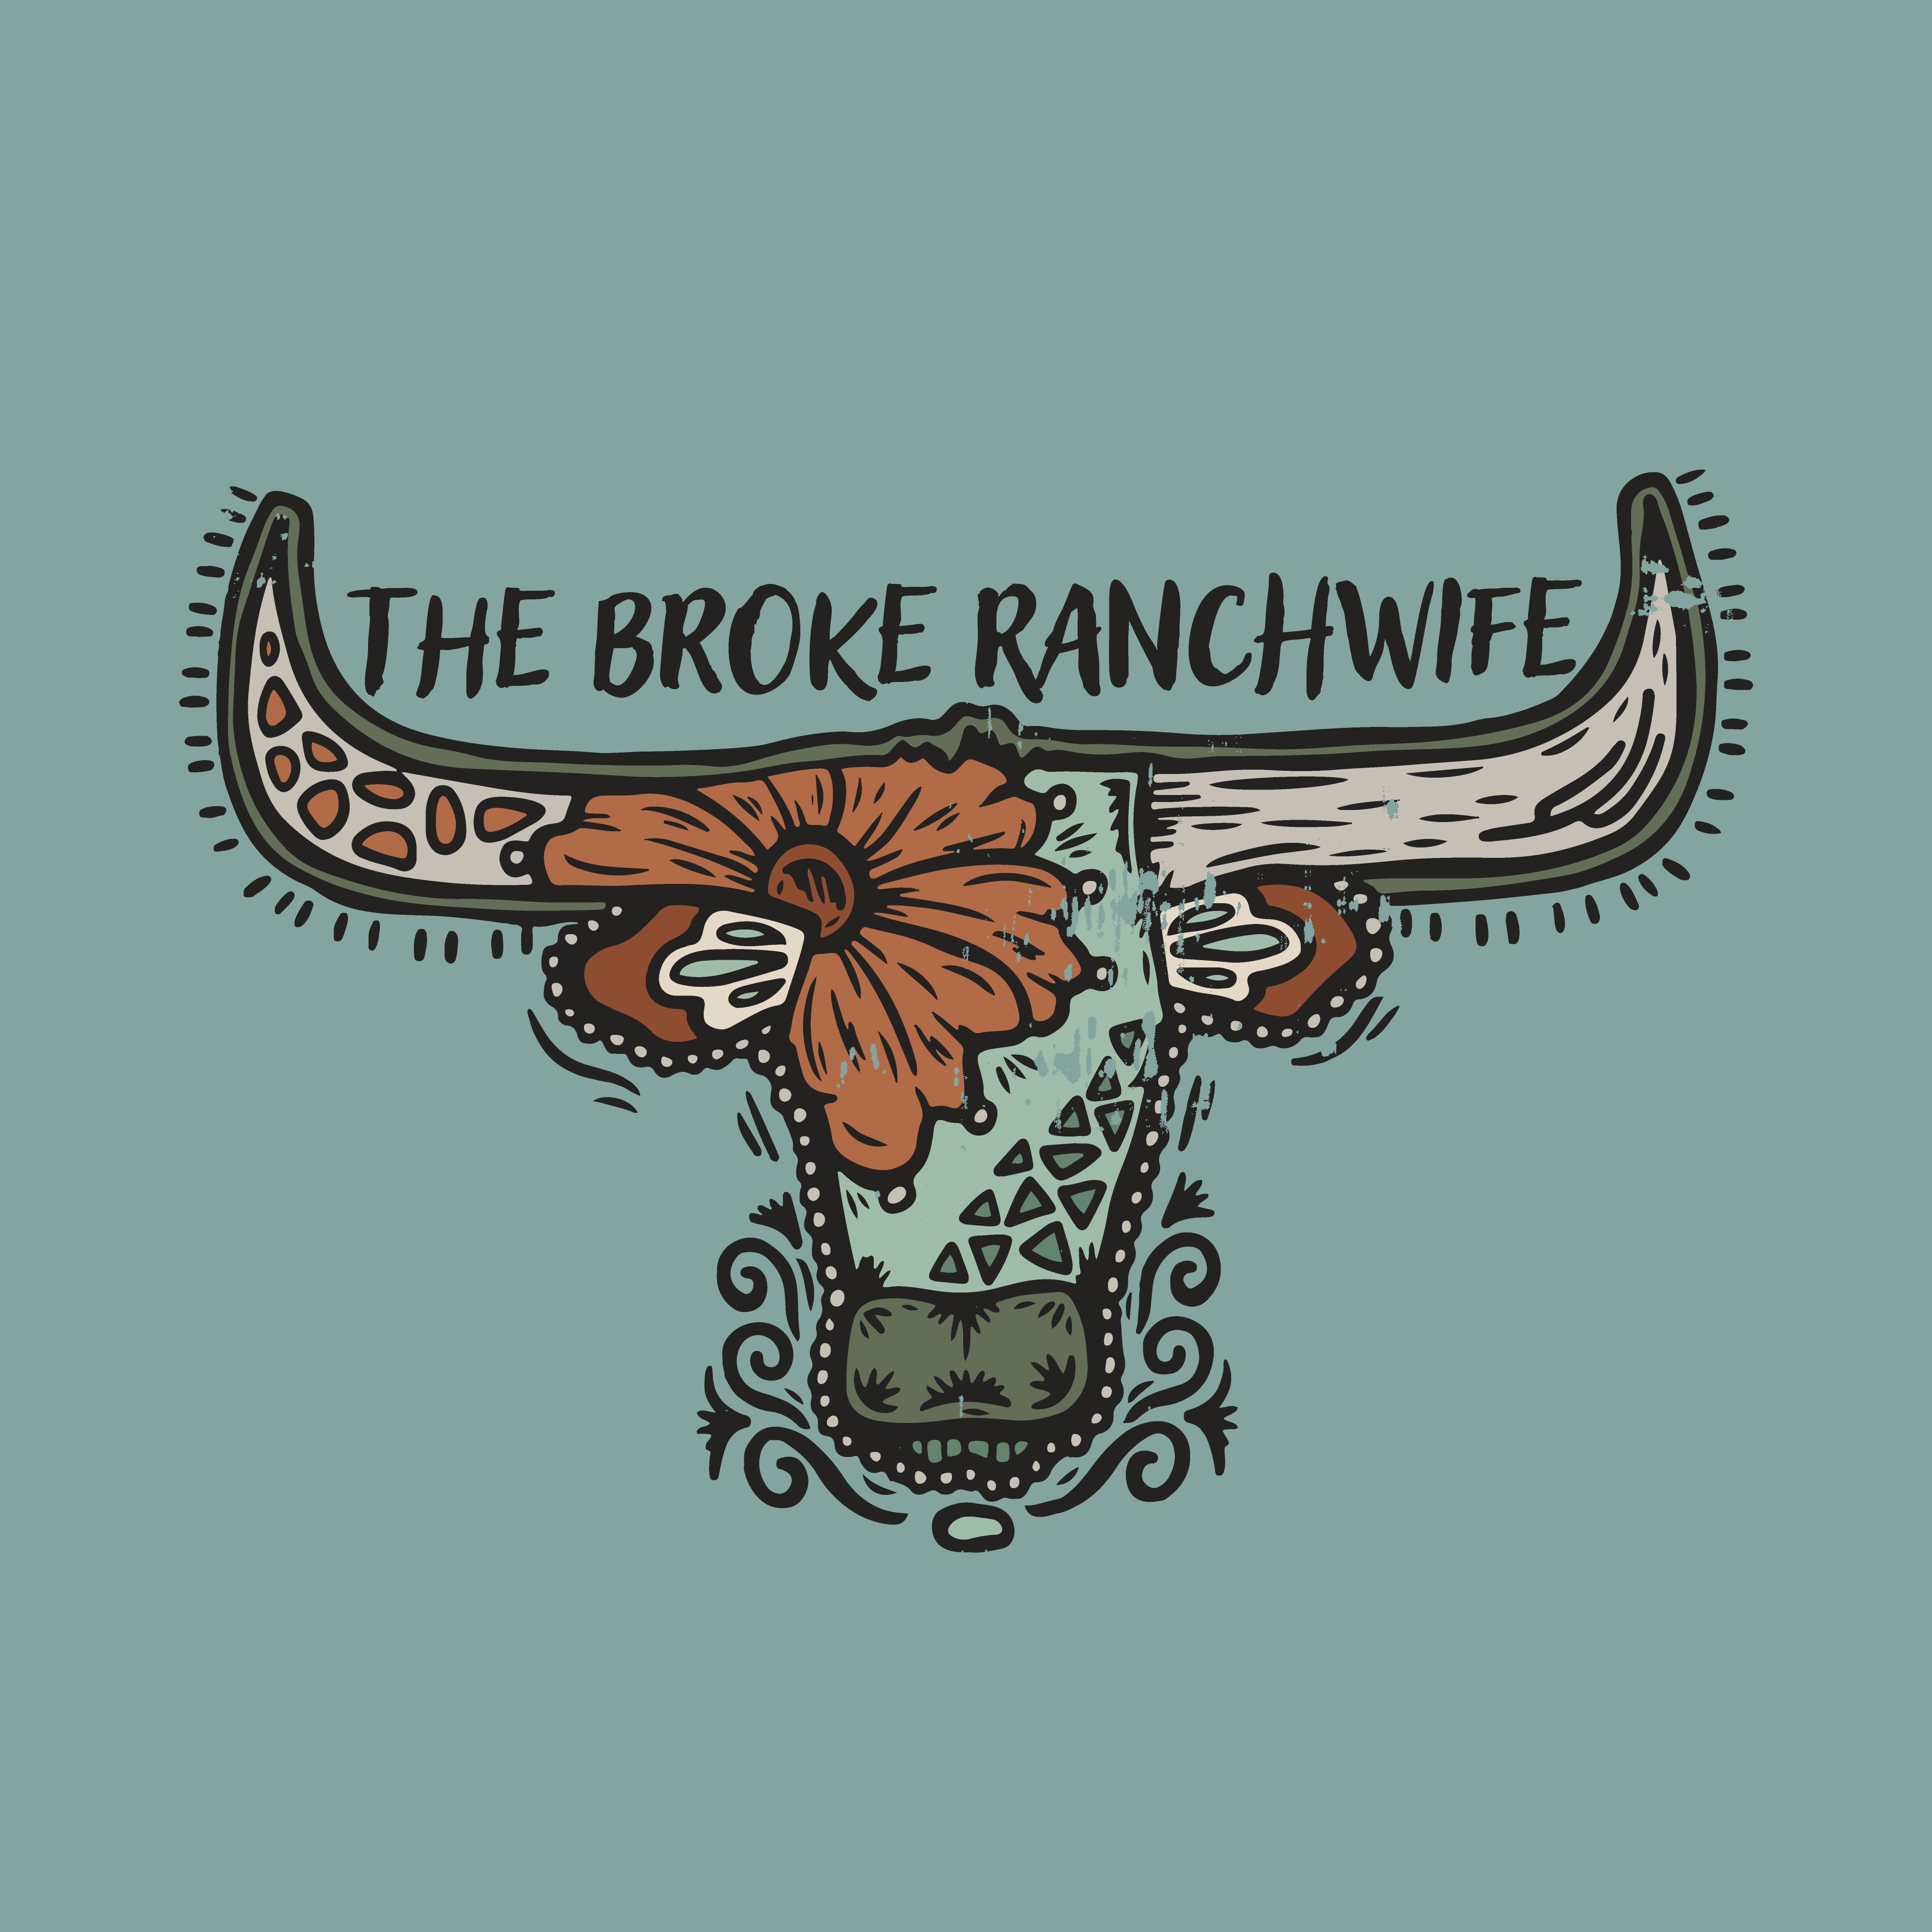 The Broke Ranchwife